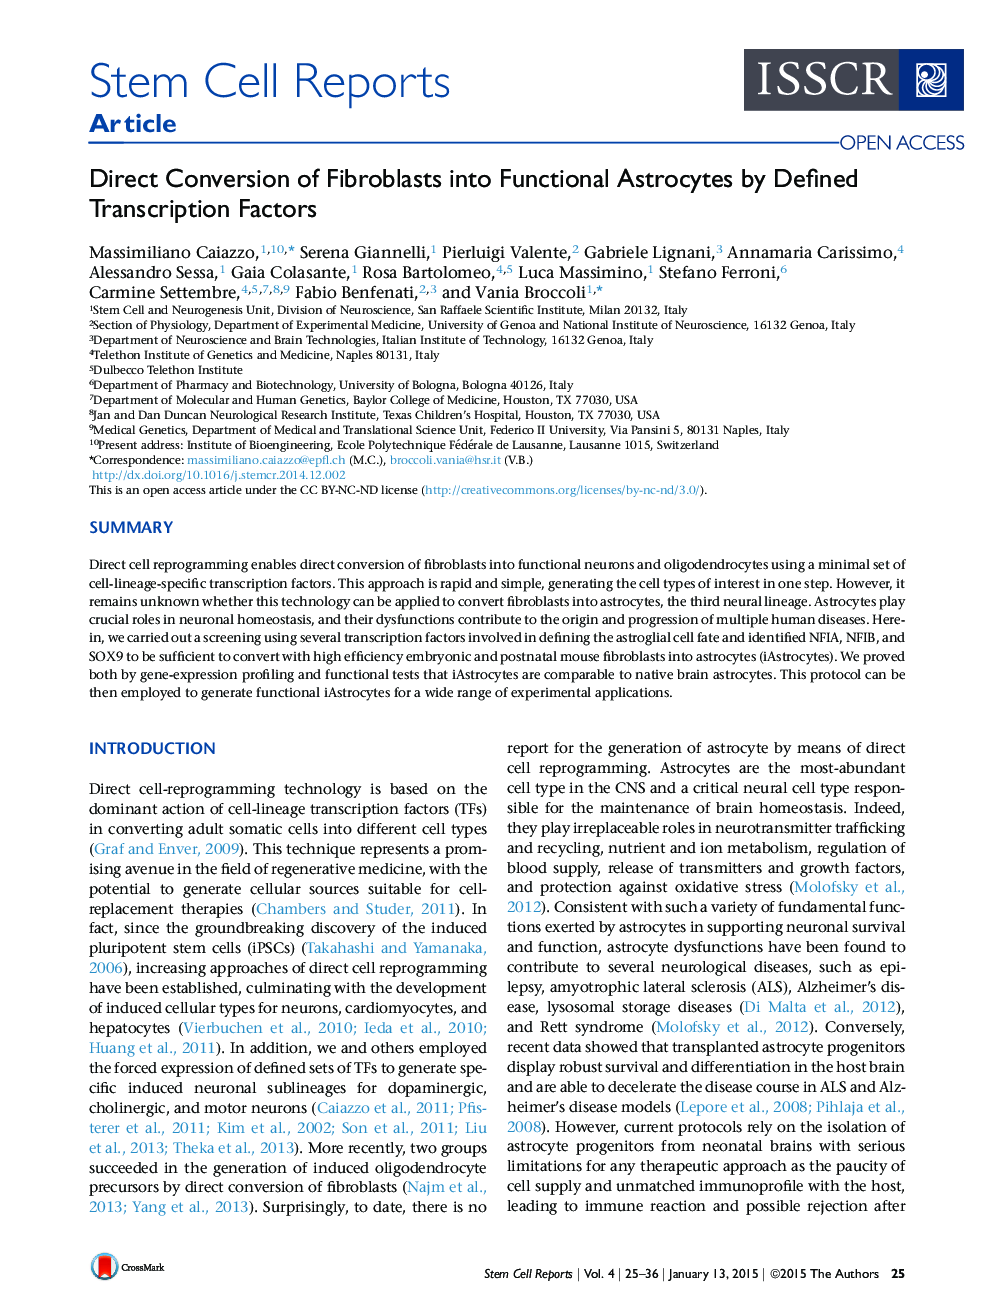 Direct Conversion of Fibroblasts into Functional Astrocytes by Defined Transcription Factors 